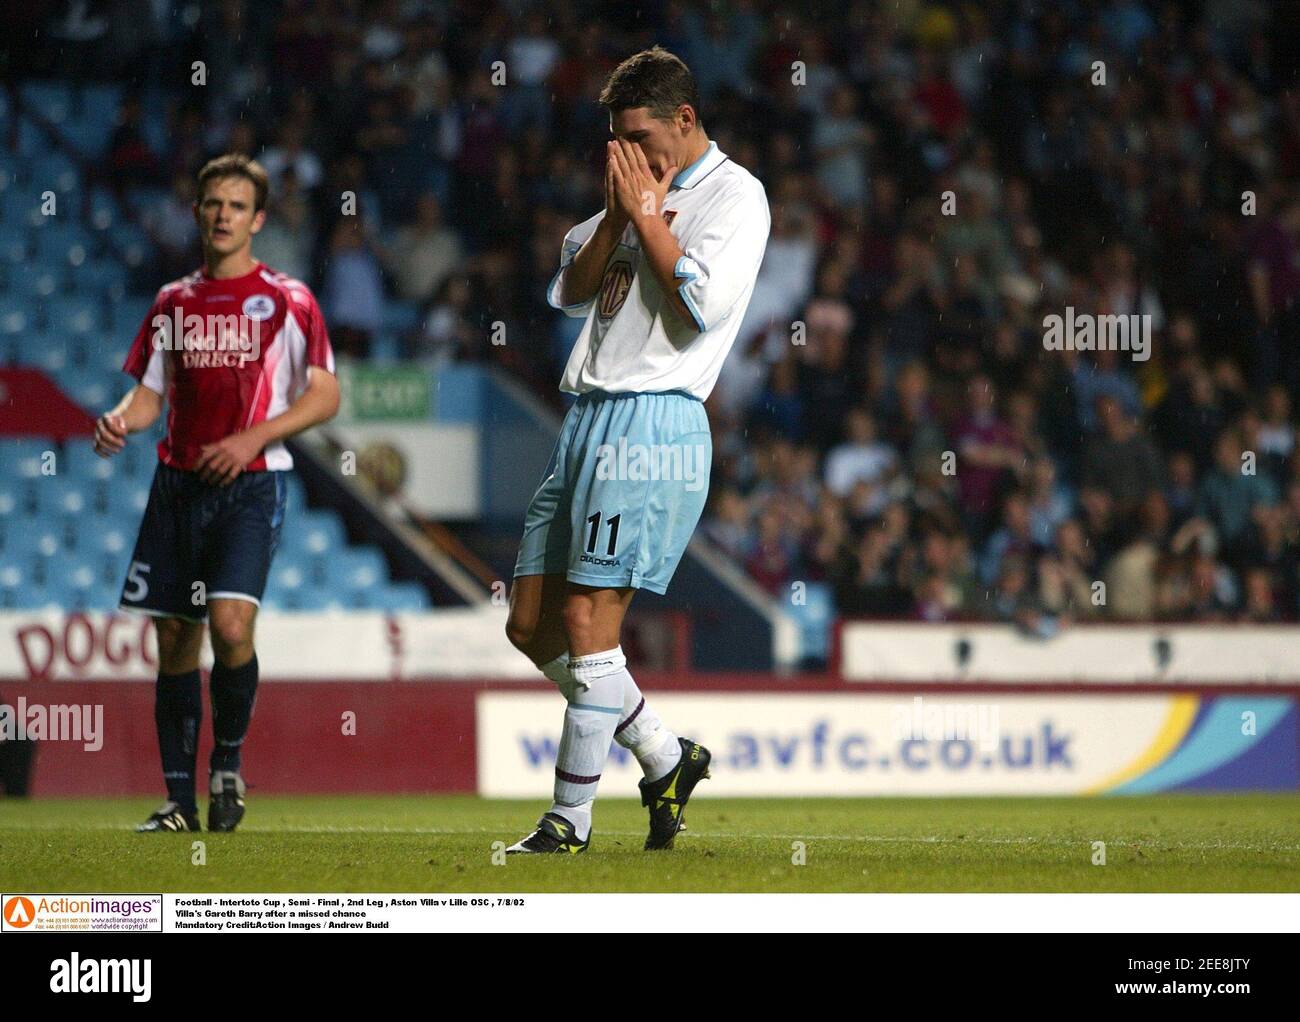 Football - Intertoto Cup , Semi - Final , 2nd Leg , Aston Villa v Lille OSC , 7/8/02  Villa's Gareth Barry after a missed chance  Mandatory Credit:Action Images / Andrew Budd Stock Photo